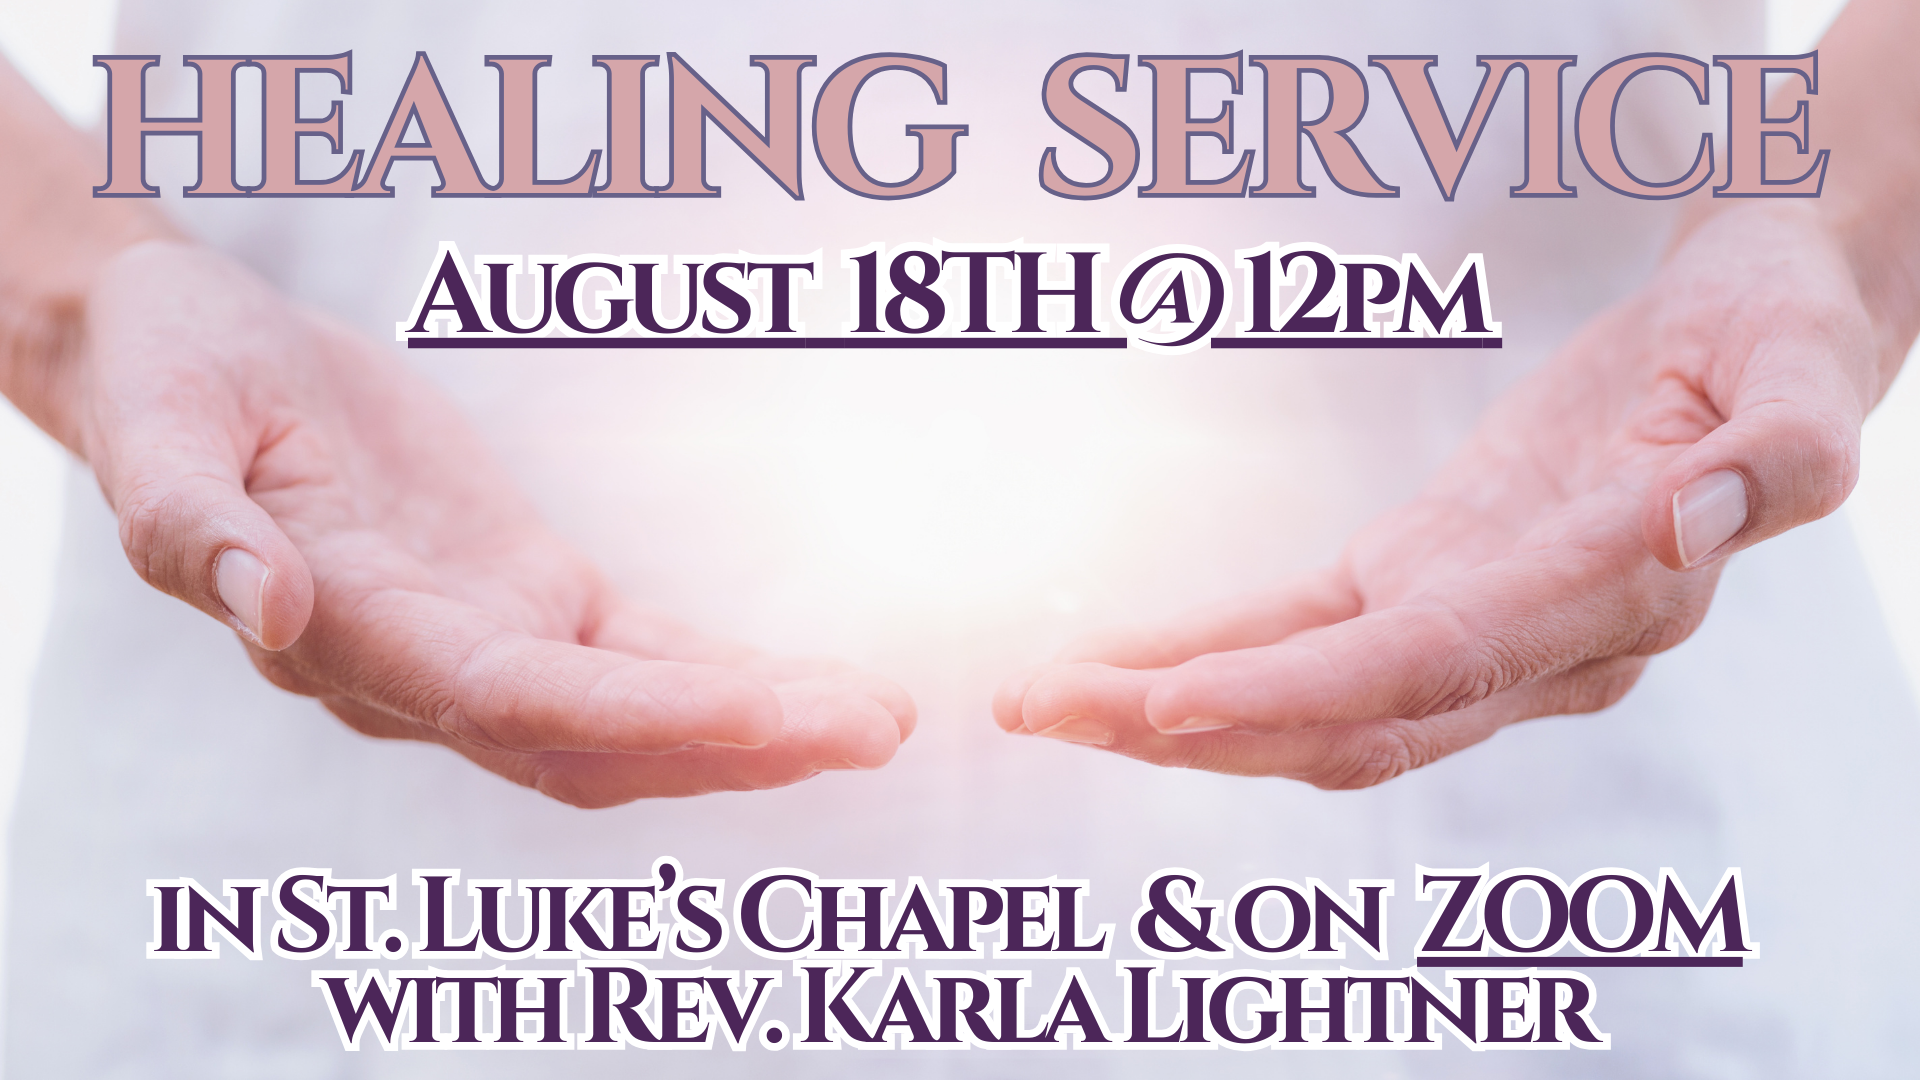 Healing Service August 18th